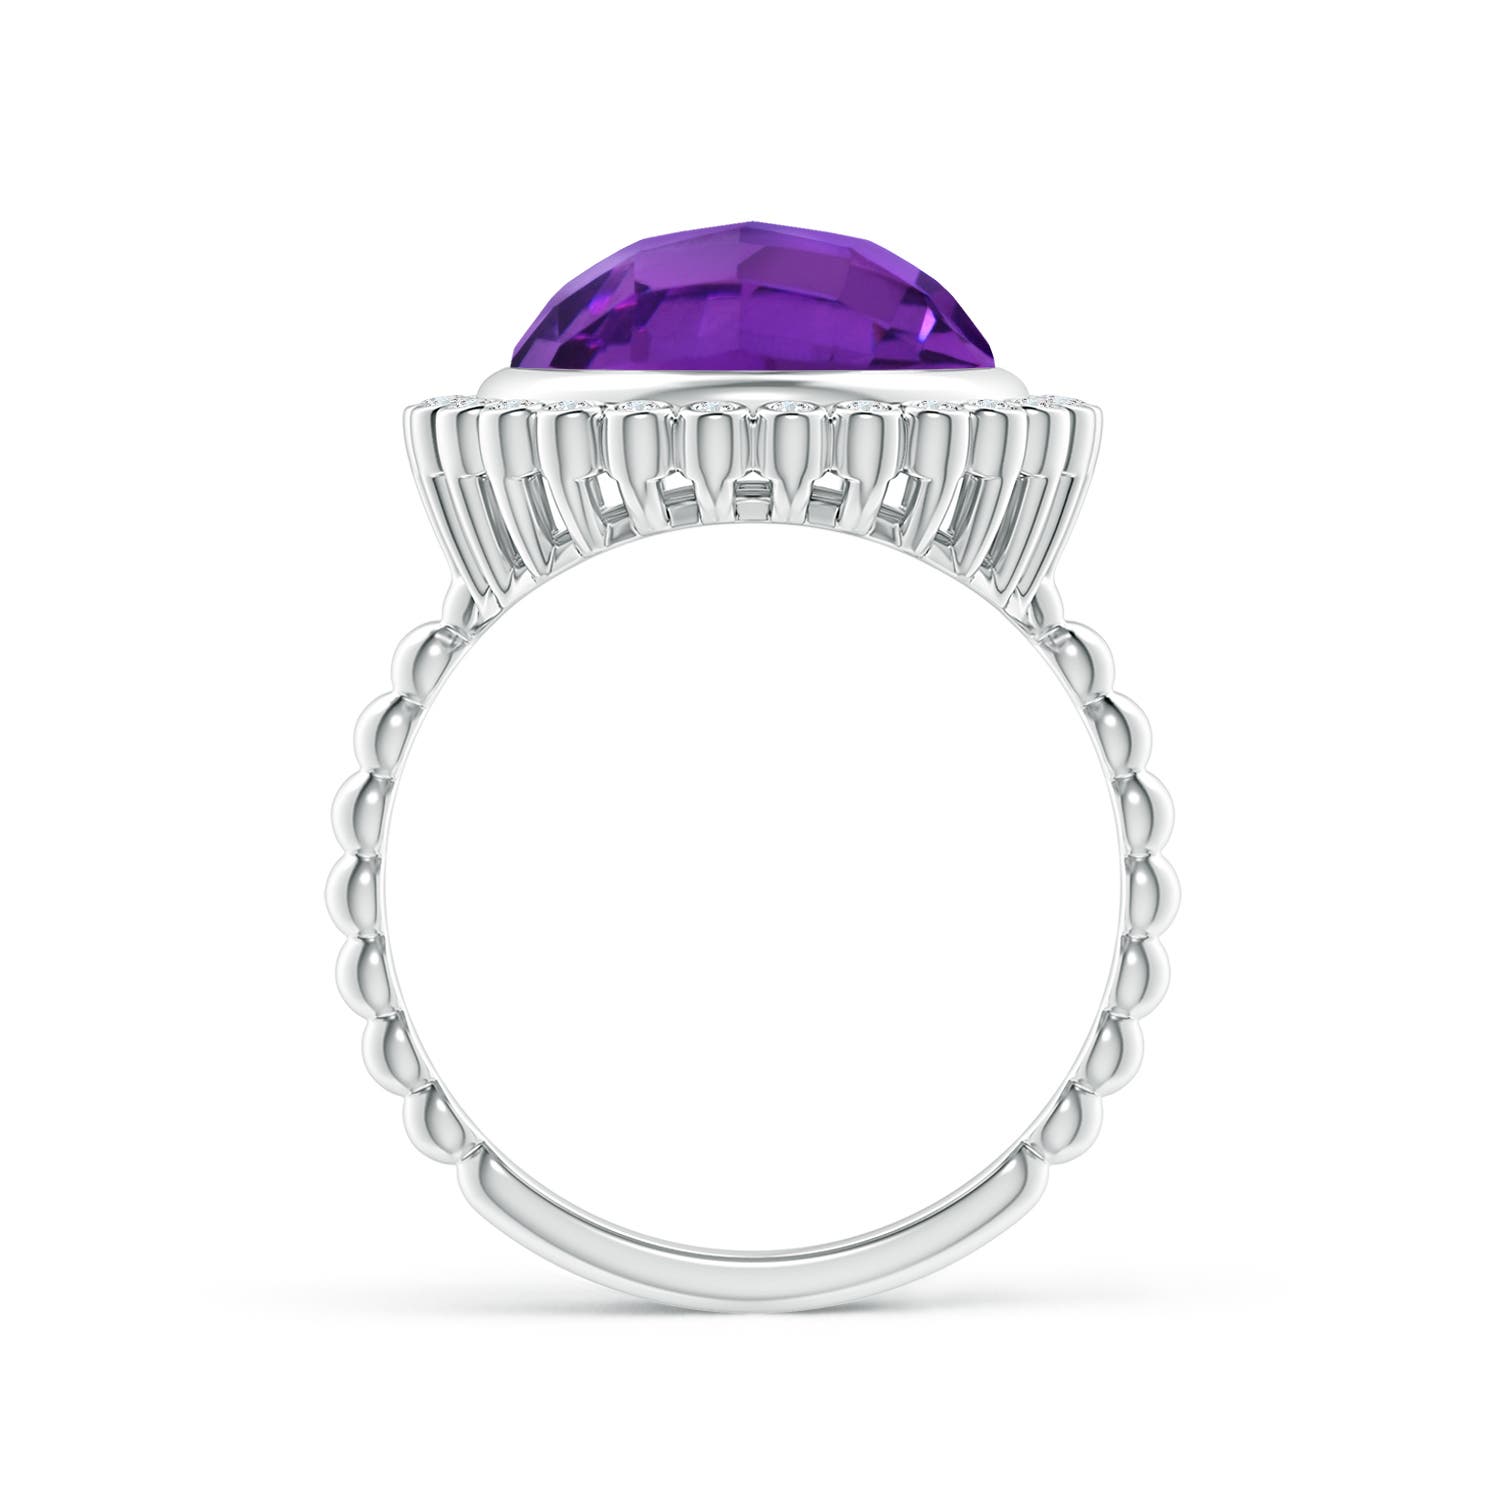 AAA - Amethyst / 5.01 CT / 14 KT White Gold